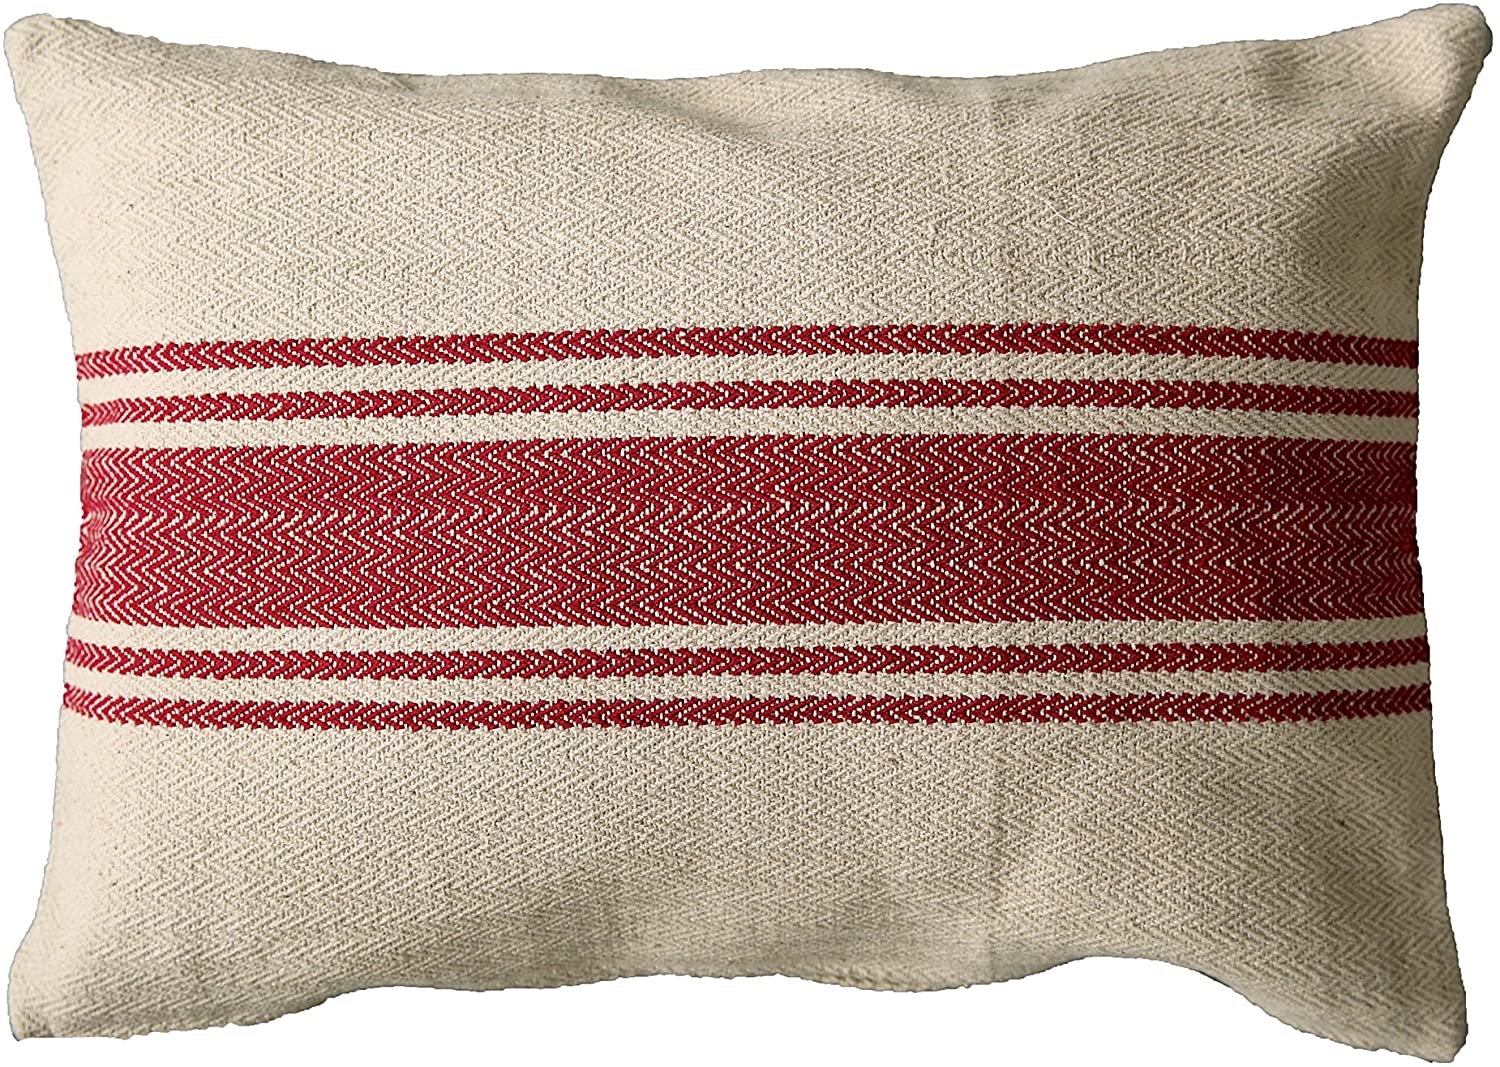 Cream Cotton Canvas Pillow with Red Stripes - Image 0